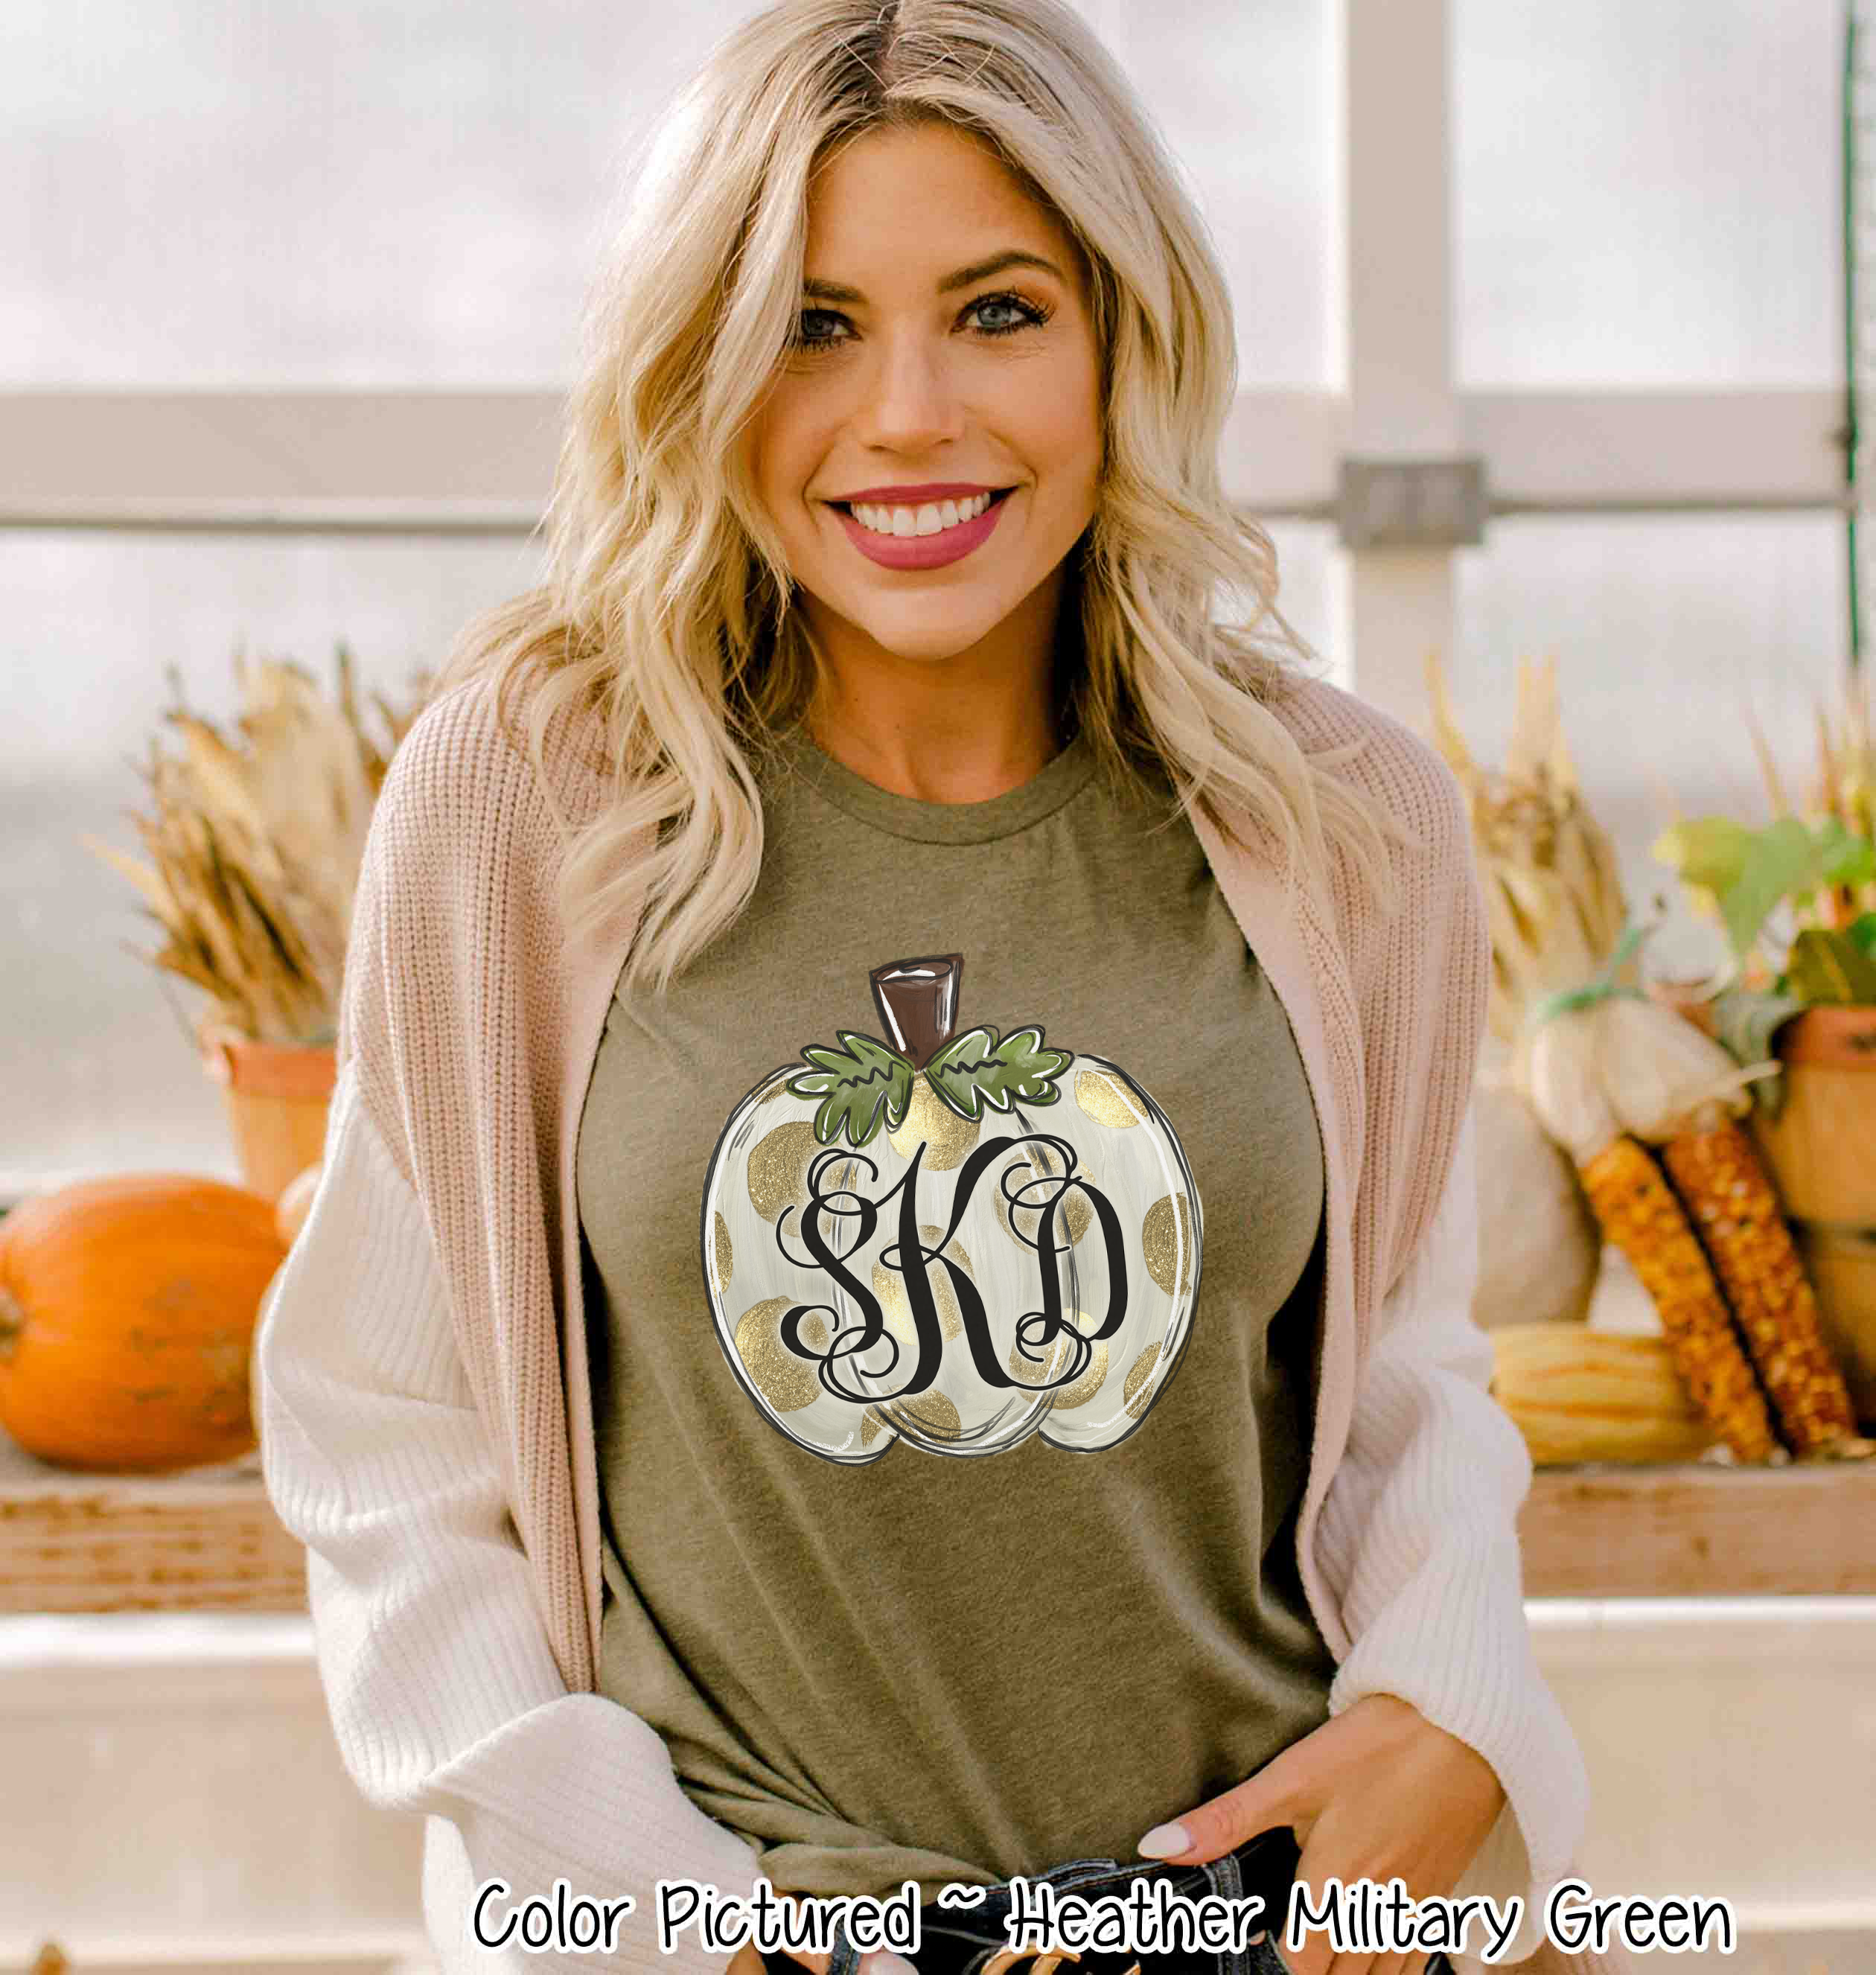 Fall Monogram White Pumpkin with Gold Dots Tee